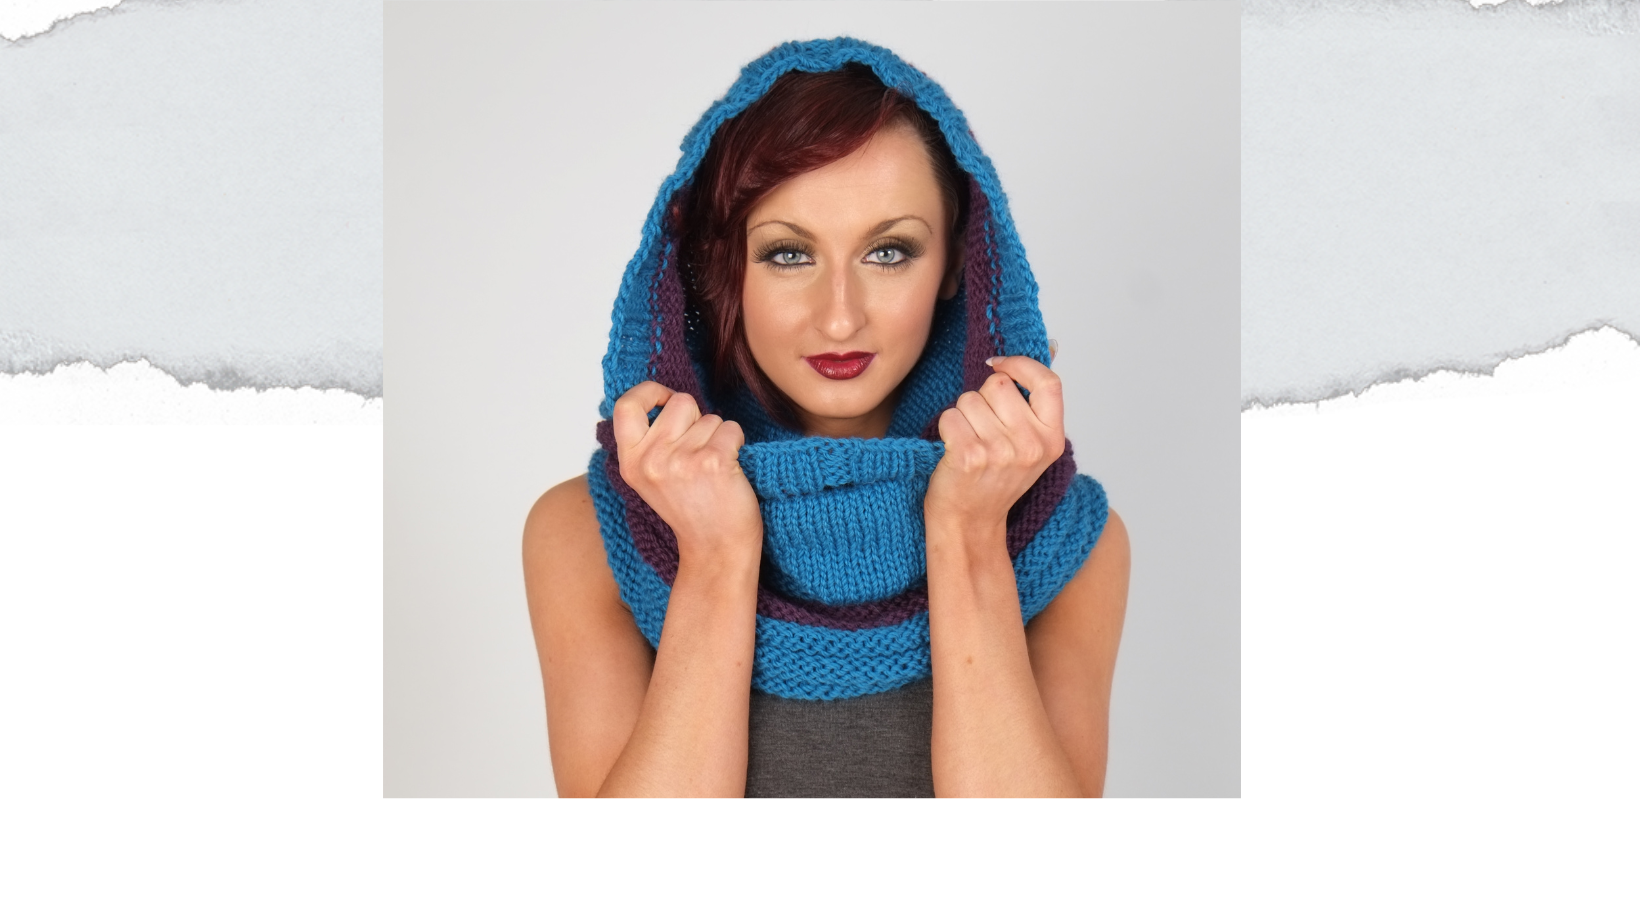 Female wearing a cowl covering head. Cowl knitted in turquoise with purple stripes.